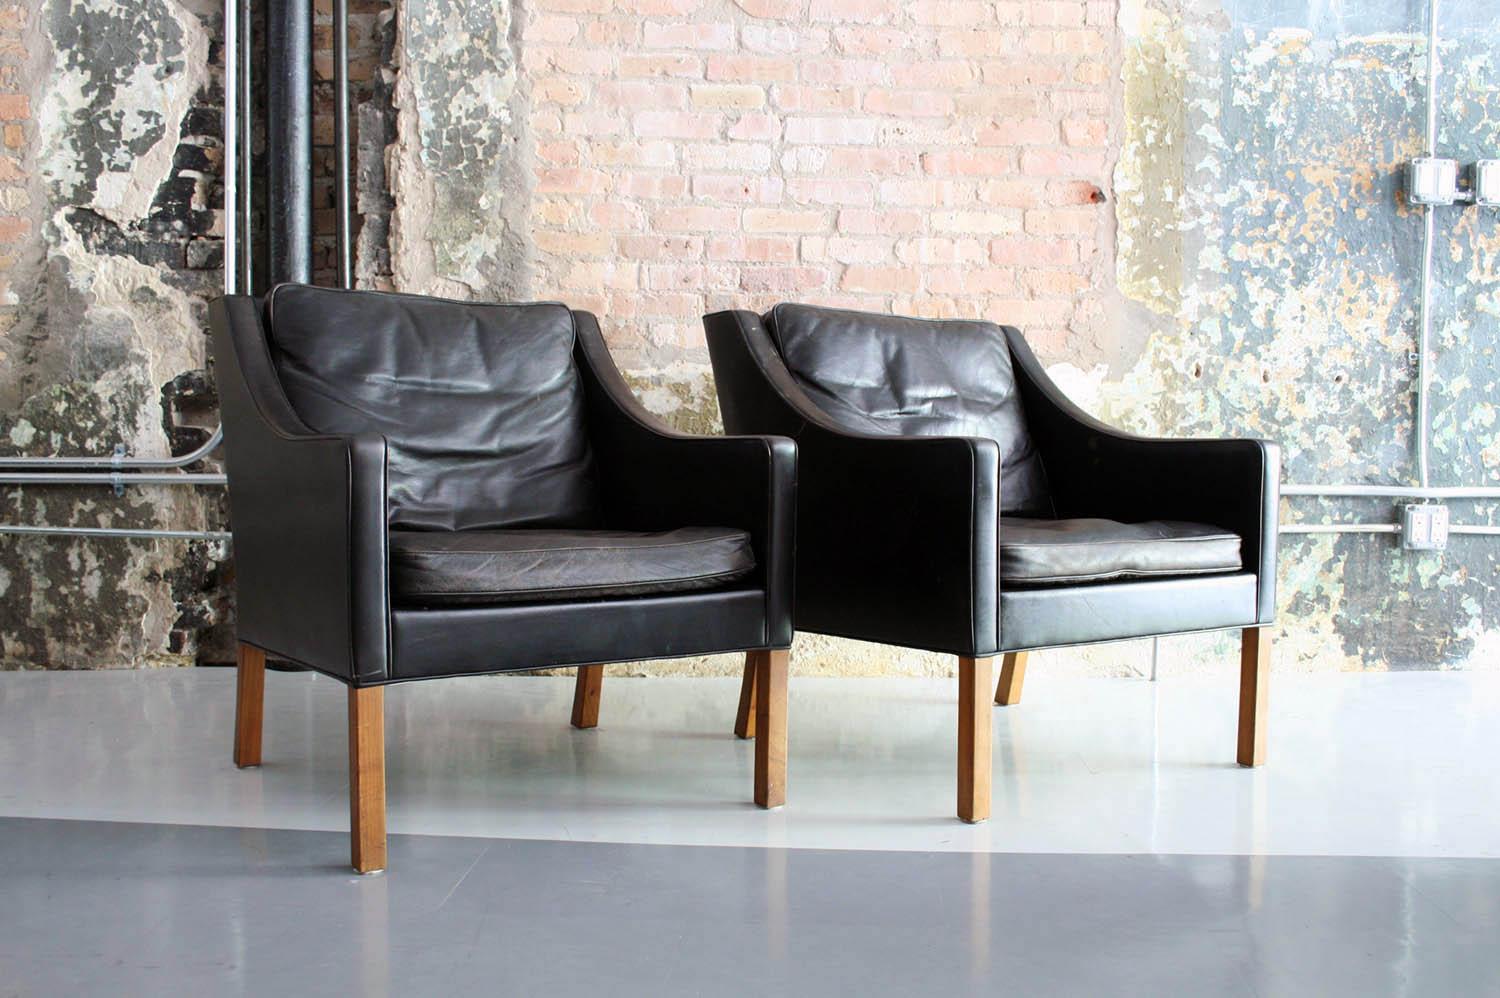 Beautiful pair in vintage original condition. Down filled leather cushions. Danish craftsmanship and modern lines.